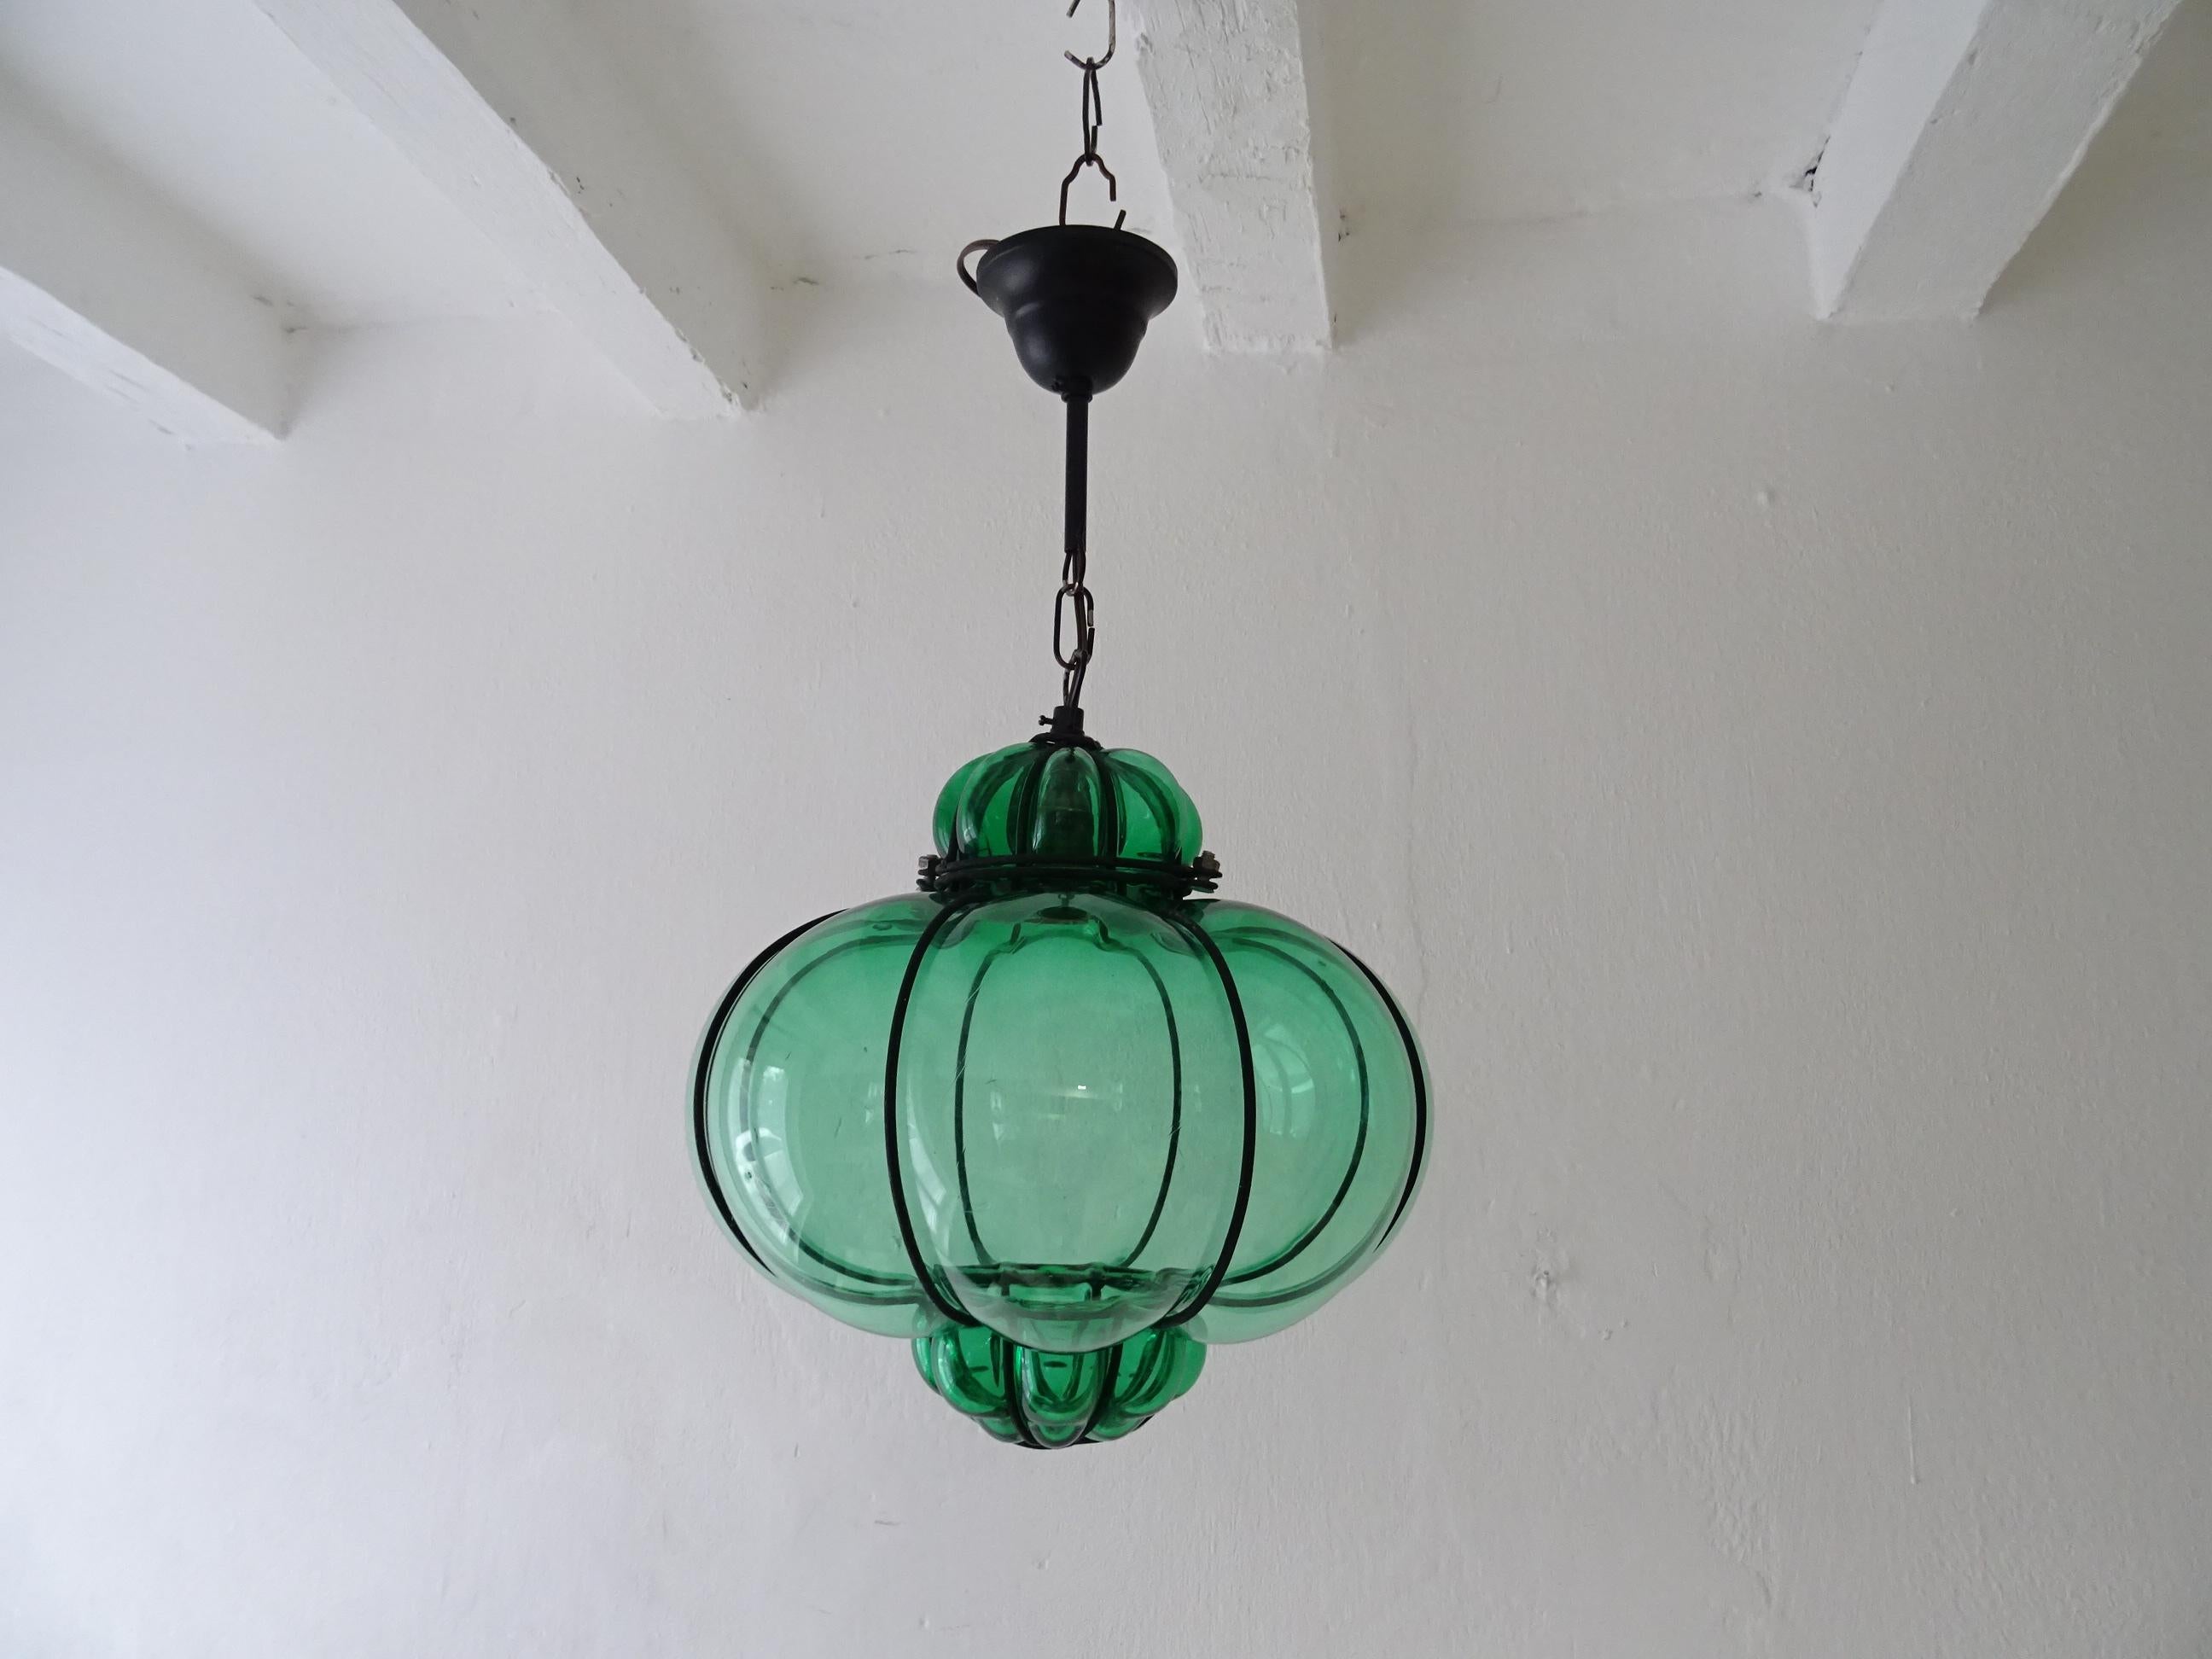 Housing one-light. Rare green Murano blown glass. Great craftsmanship. Re-wired and ready to hang with appropriate certified UL US socket. Rare shape. Free priority UPS shipping from Italy, no custom fees. Adding another 7 inches of original chain